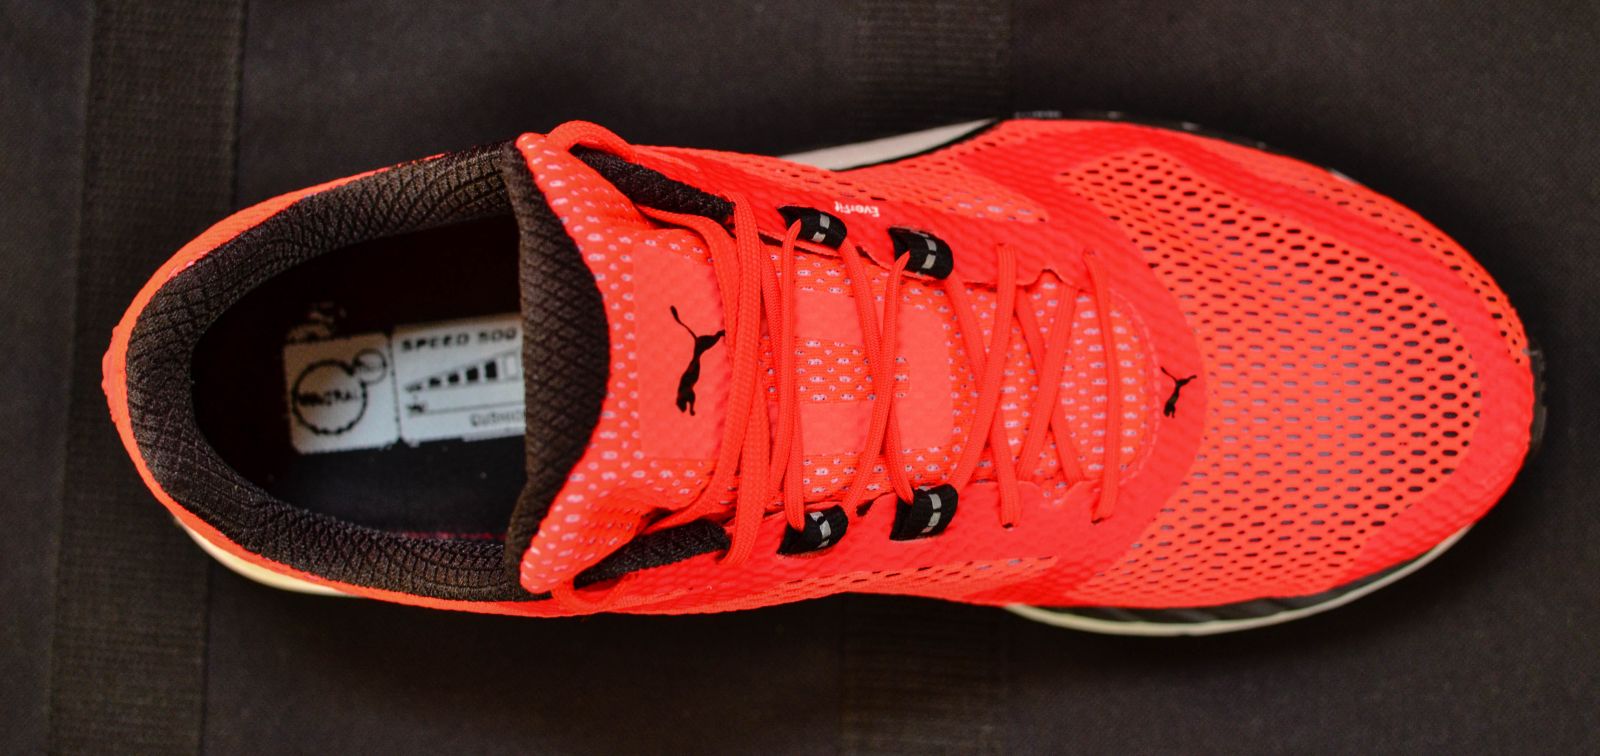 Review: Puma Speed 500 Ignite Running Shoes